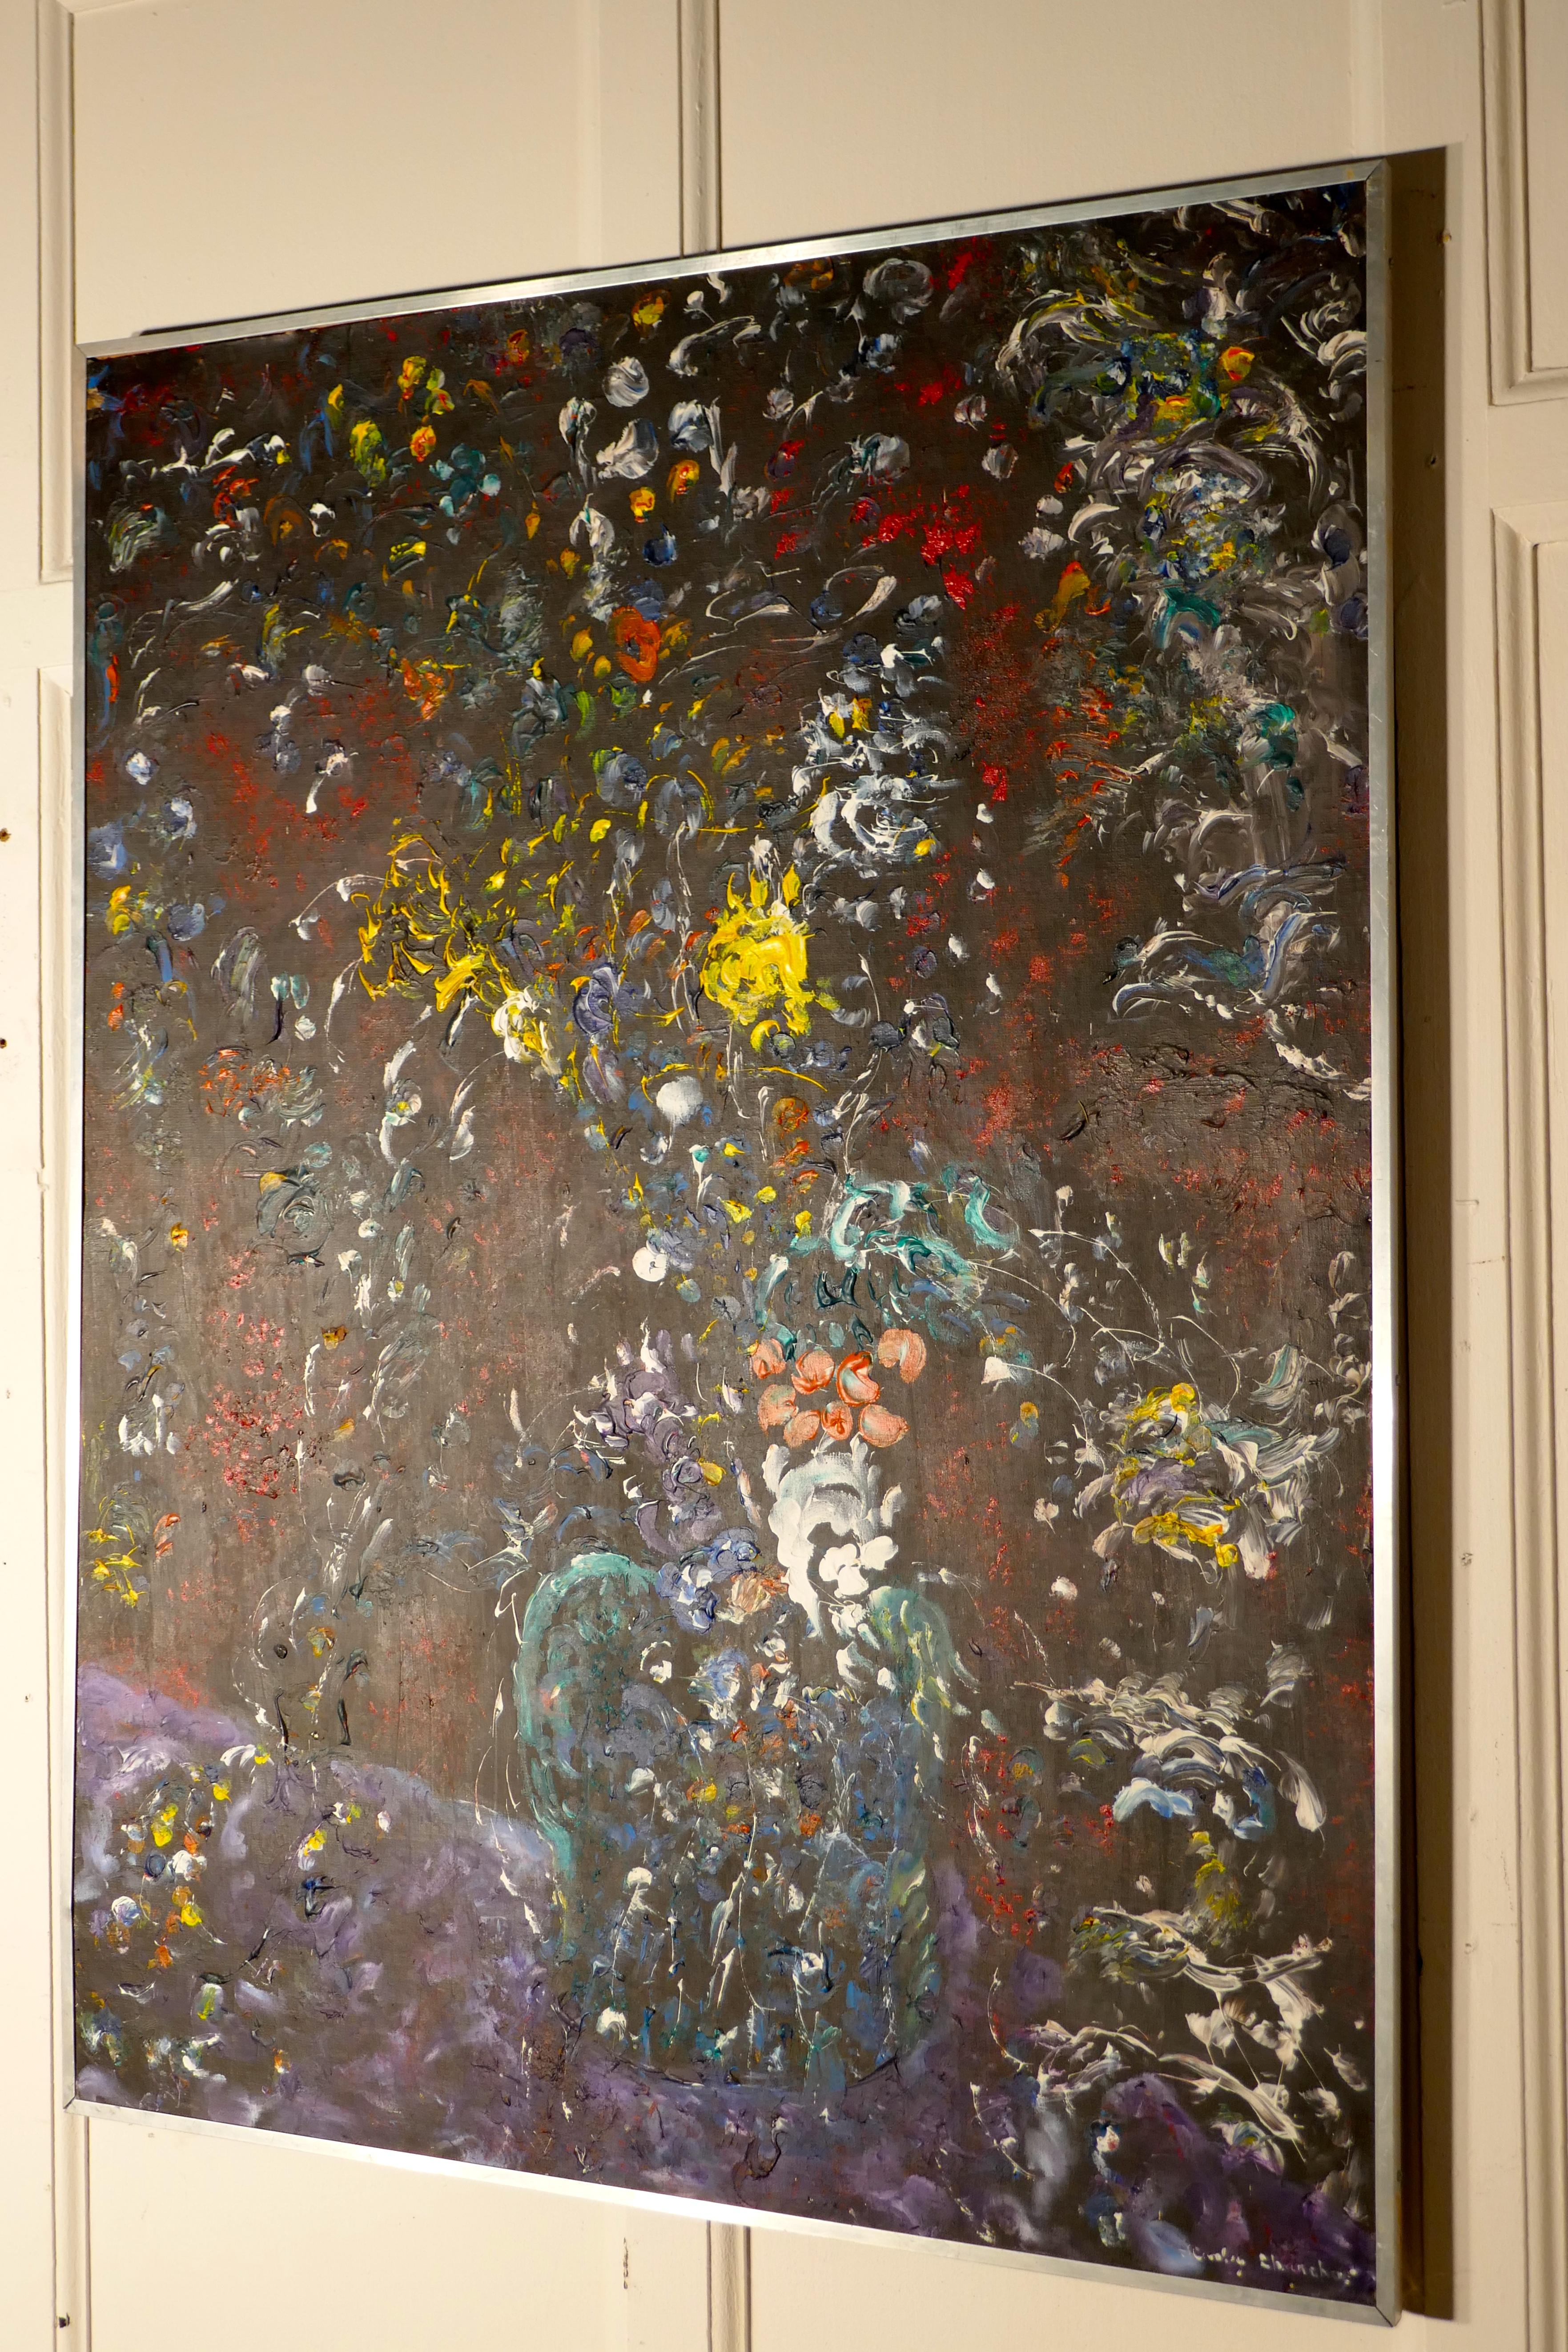 1960s-1970s large abstract oil painting “A splash of Colour” by Stanley Churchus.

An attractive painting has a good decorators piece, oil on board, the artist is Stanley Churchus an Australian artist born in 1914 known to have studied under Fred